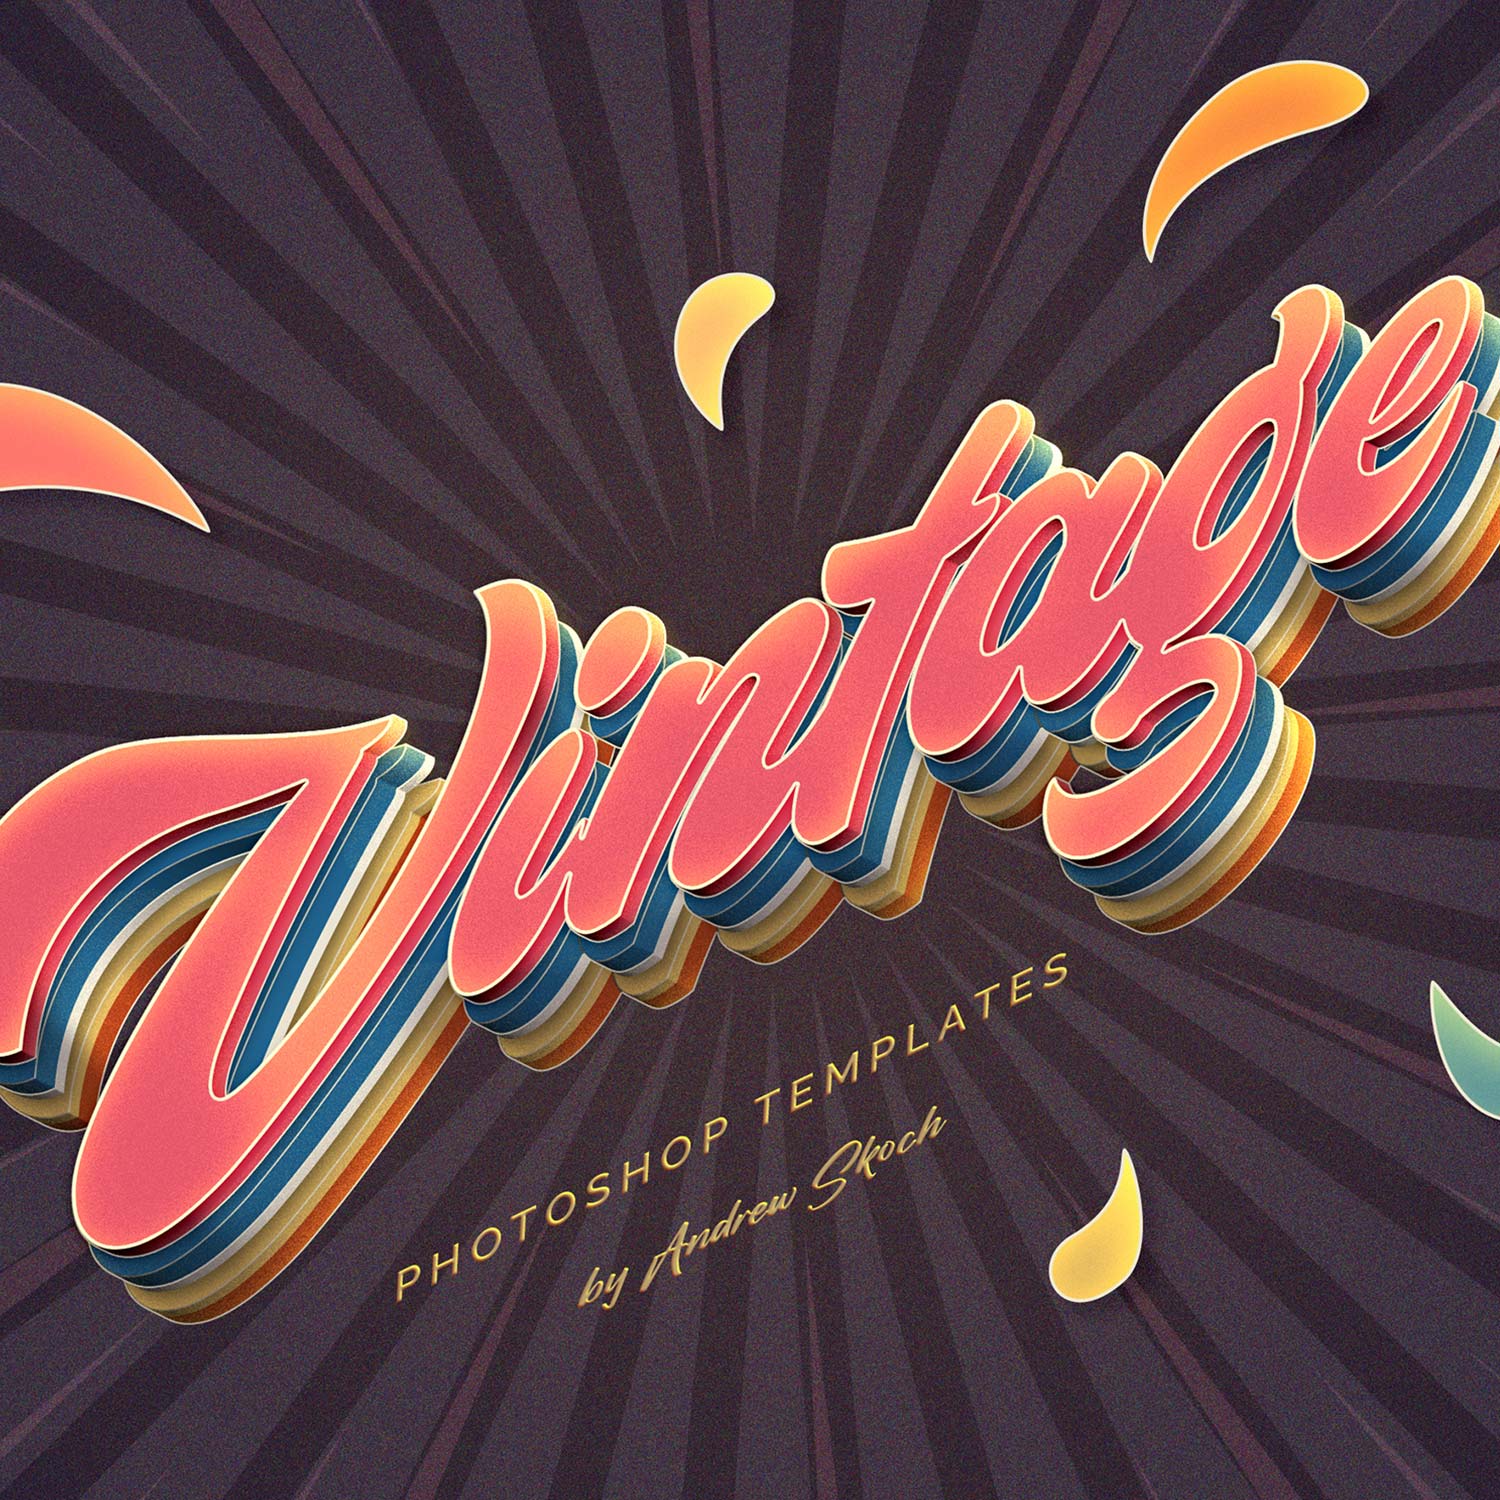 Vintage Text Effects cover image.